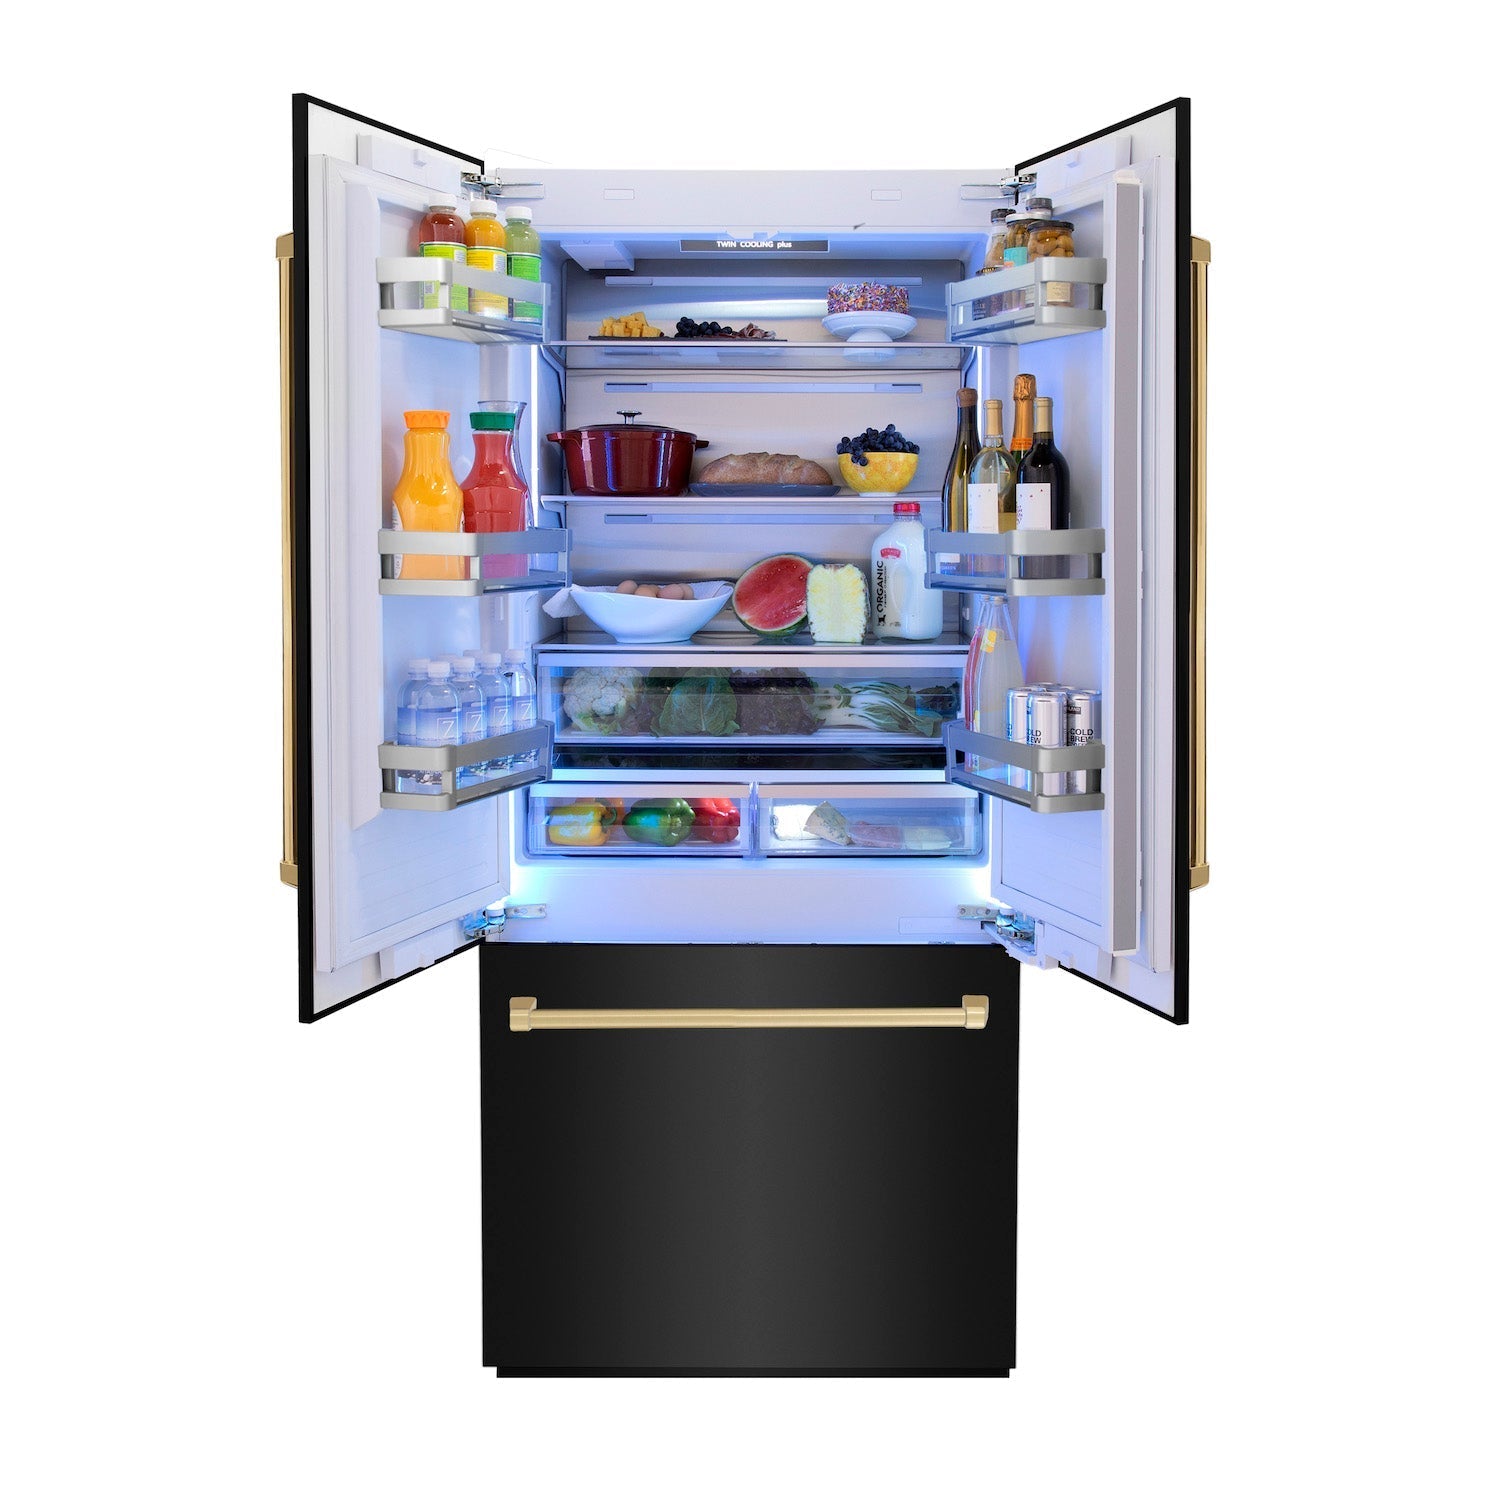 ZLINE 36" Autograph Edition 19.6 cu. ft. Built-in 3-DoorFrench Door Refrigerator with Internal Water and Ice Dispenser in Black Stainless Steel with Gold Accents (RBIVZ-BS-36-G)